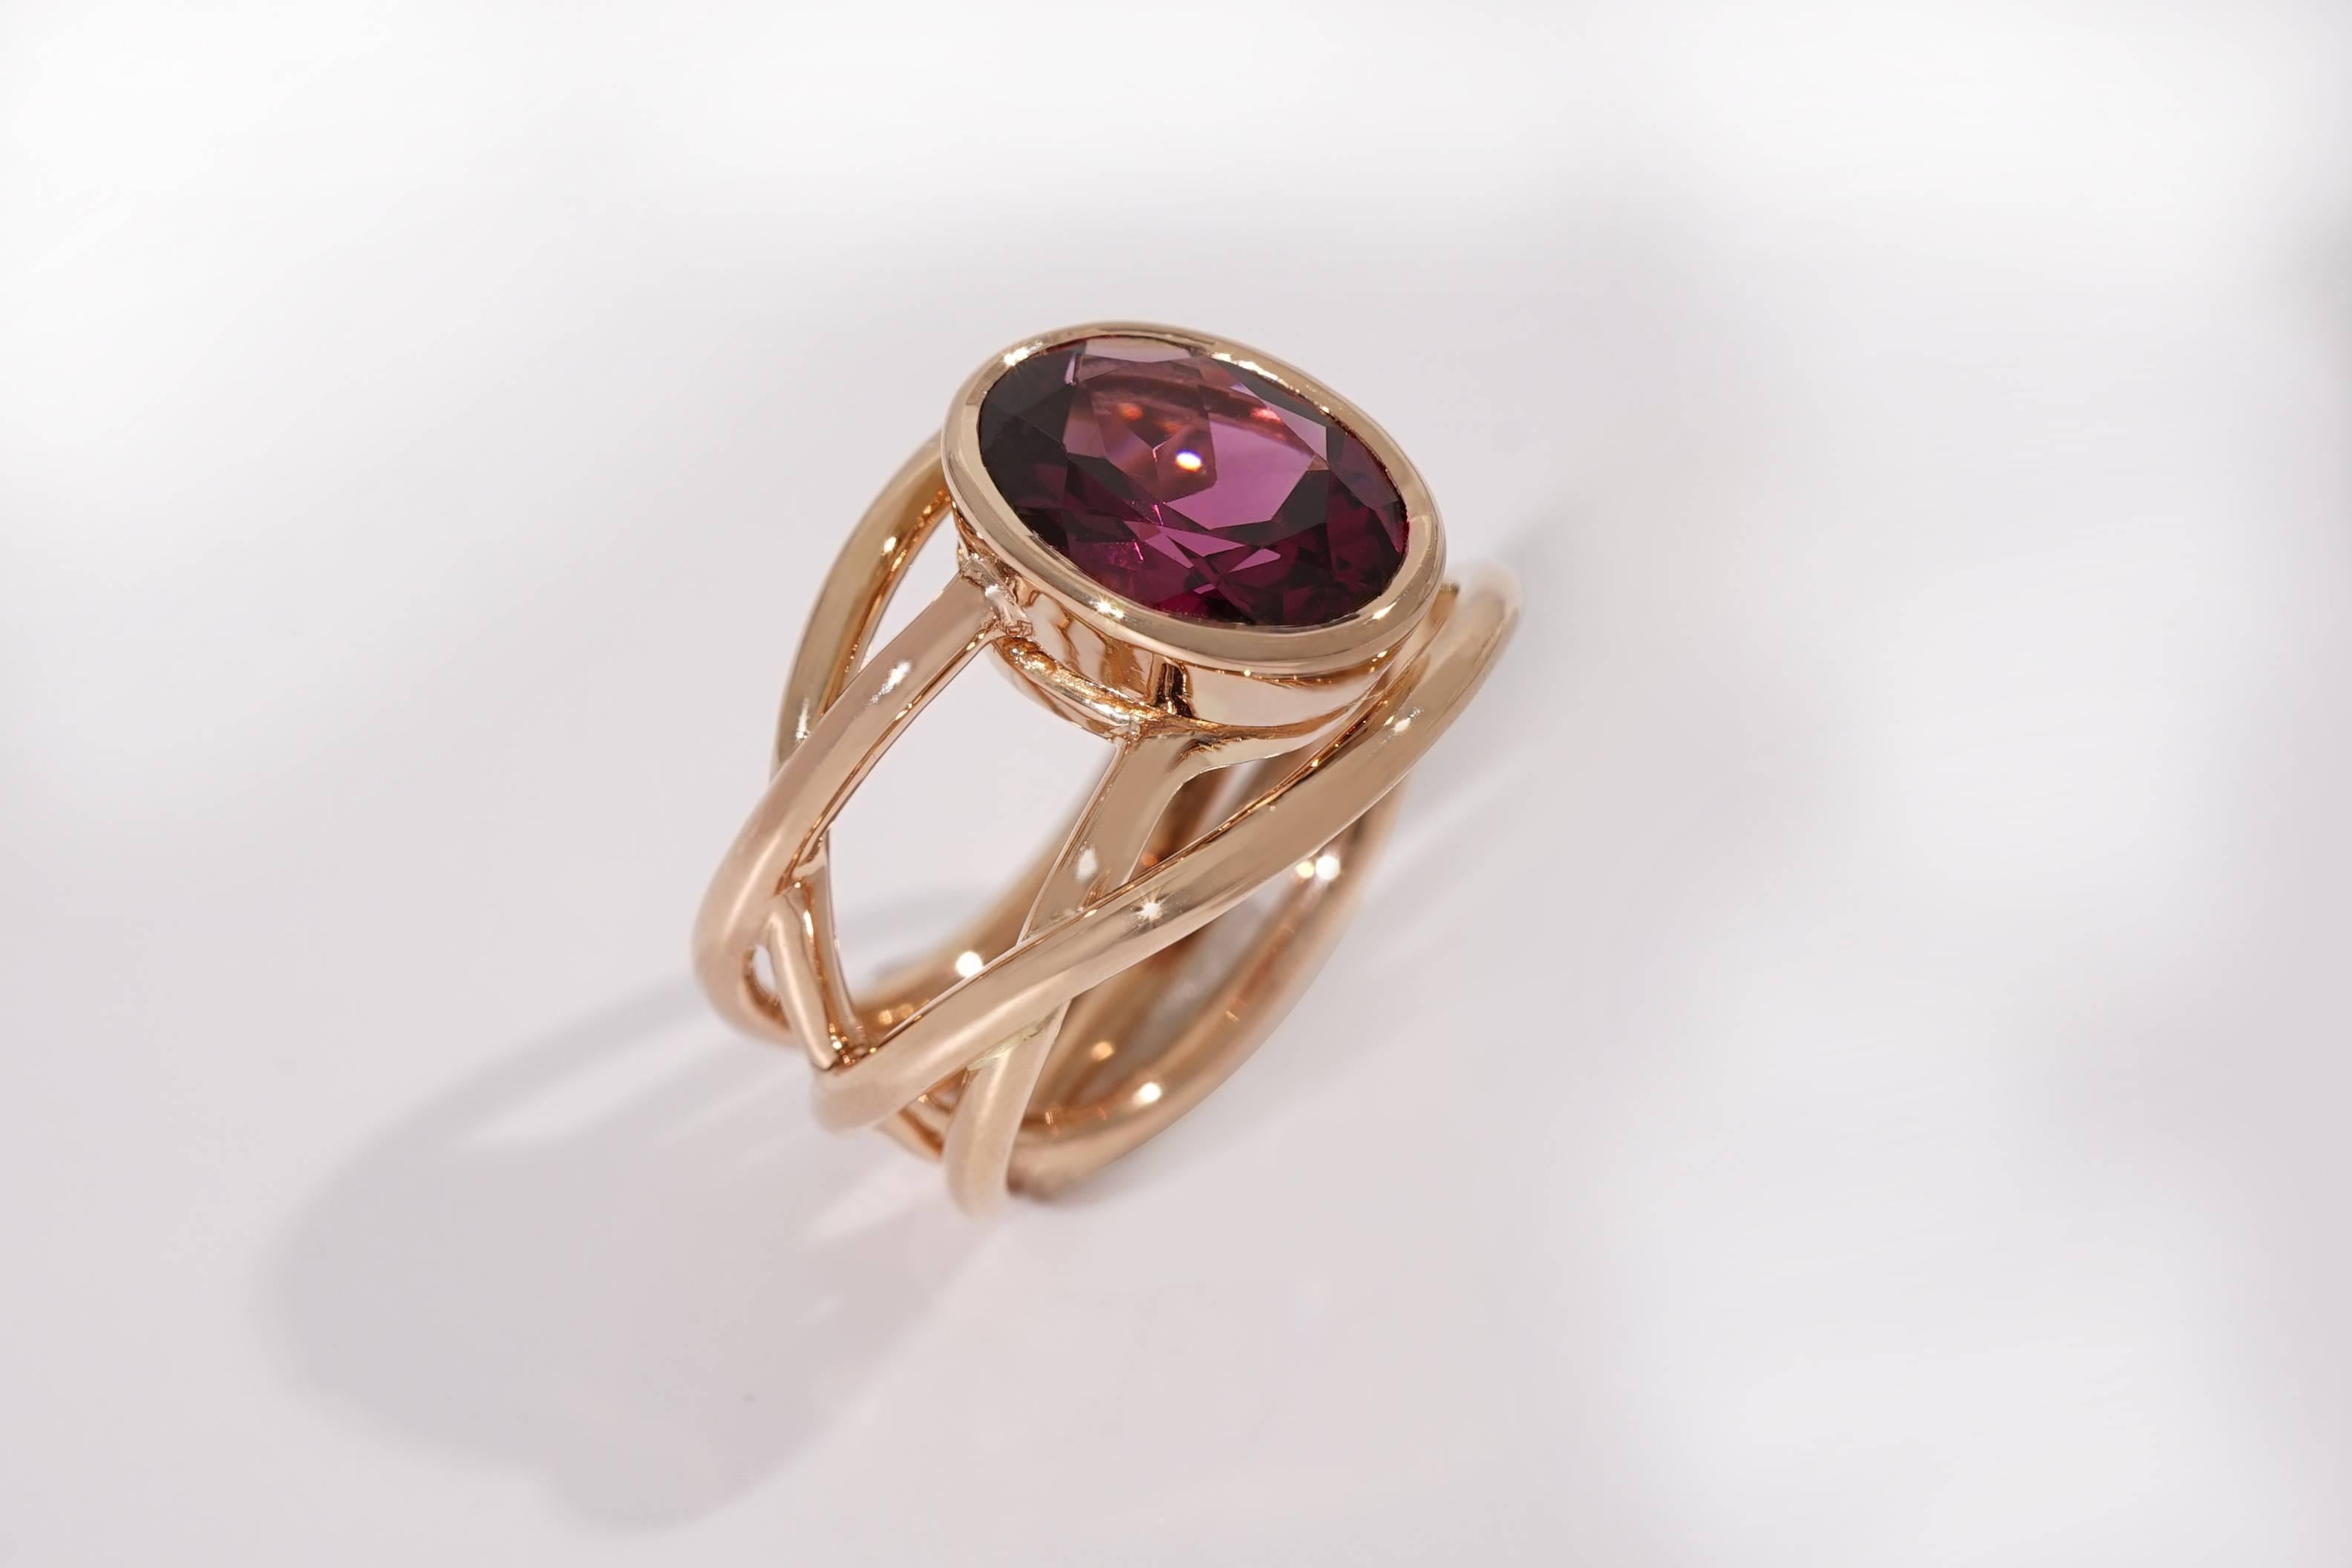 Coralie Van Caloen Rose Gold 18 Carat Cord Pinky Band Ring With Rhodolite Garnet is entirely hand made and forged in Belgium by experts goldsmiths therefore it is a 
very unique piece. The fluidity of cords give the ring a feminine, contemporary and